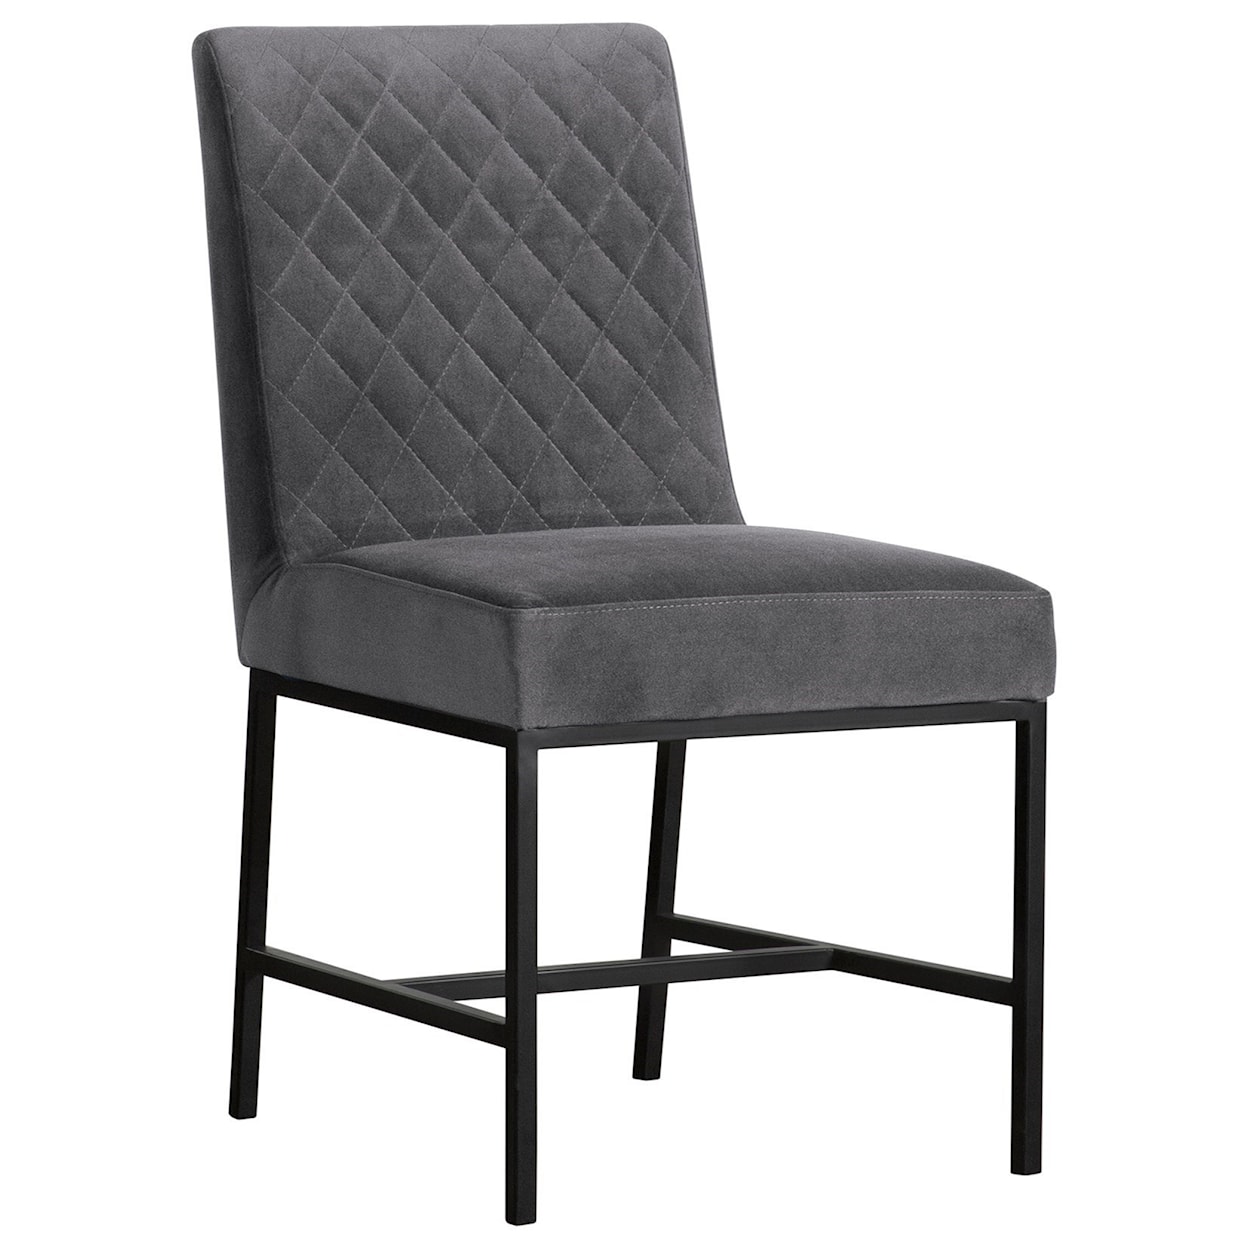 Armen Living Napoli Set of 2 Dining Chairs